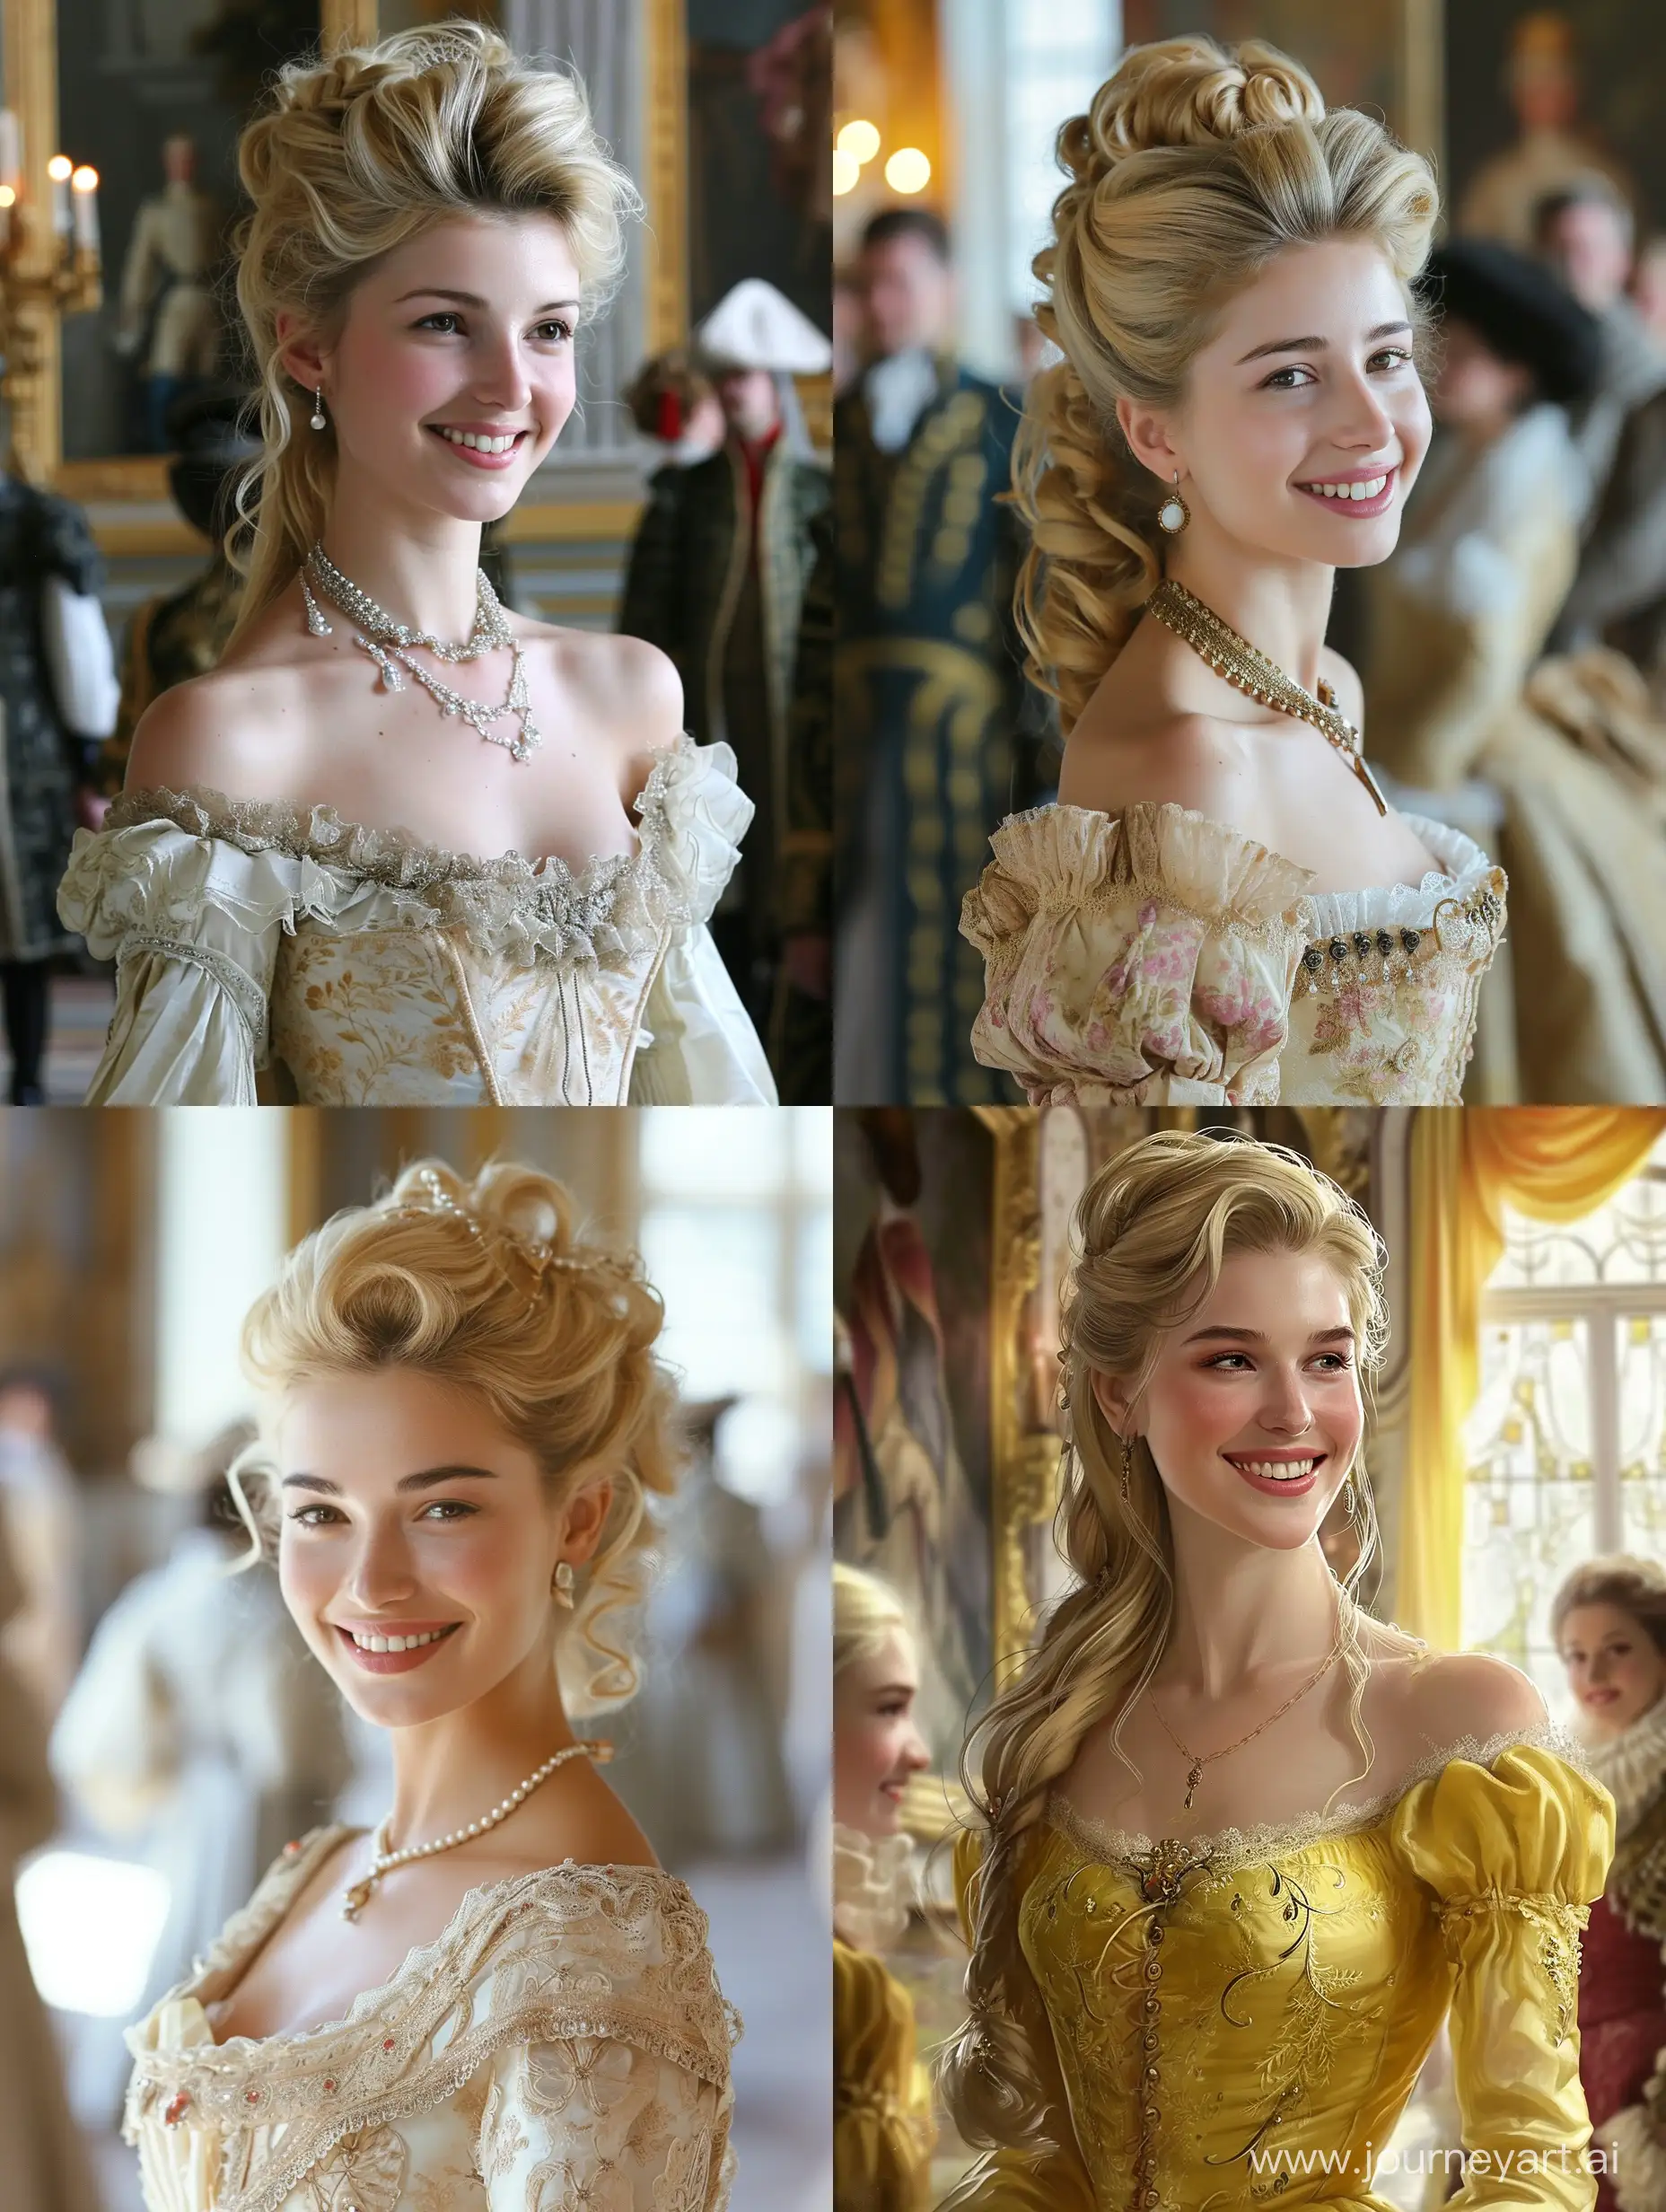 Smiling-European-Princess-in-Palace-with-Servants